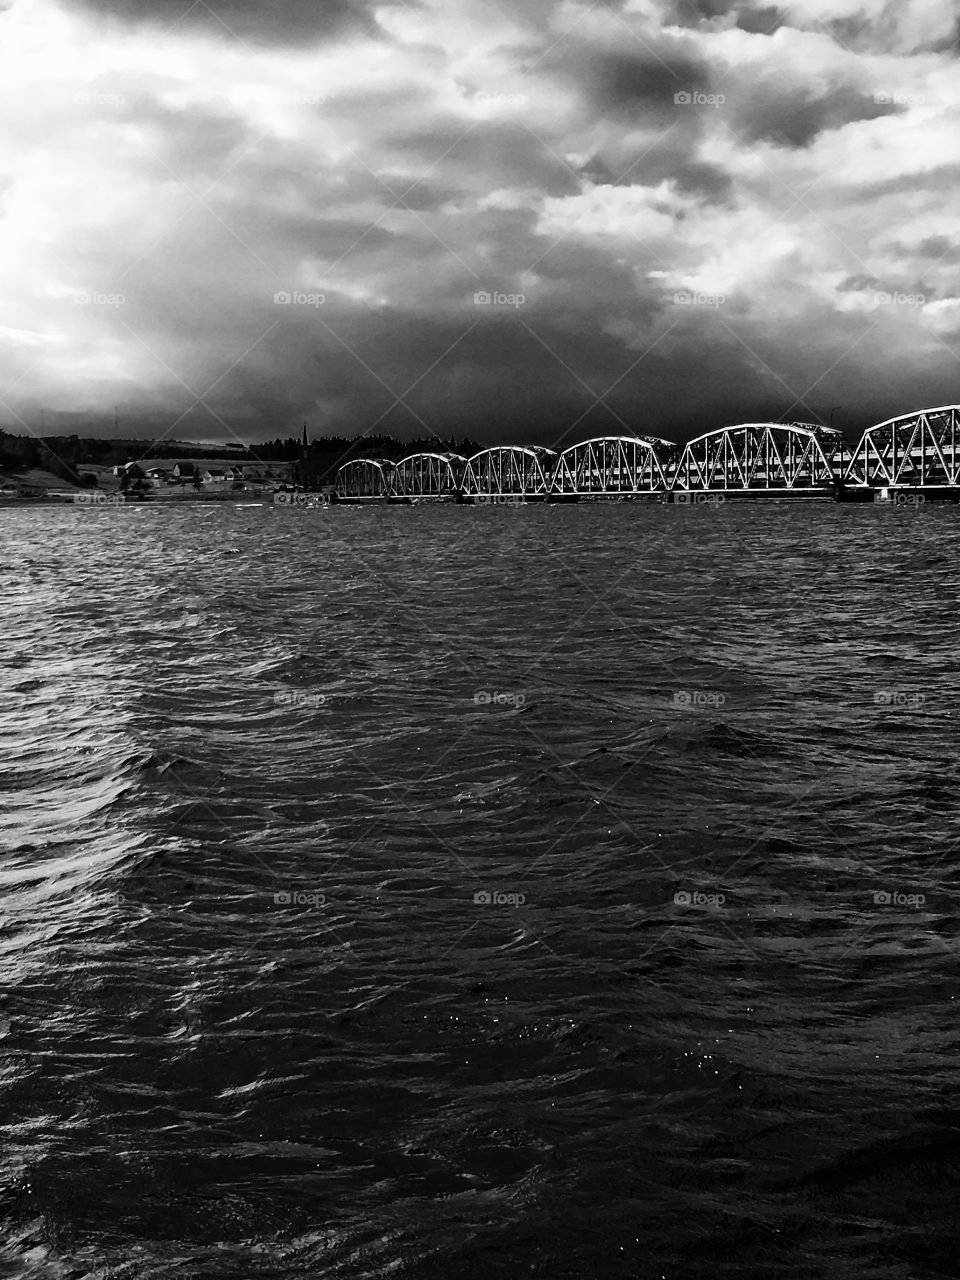 Train bridge and lake with stormy skies. Black and white landscape. 